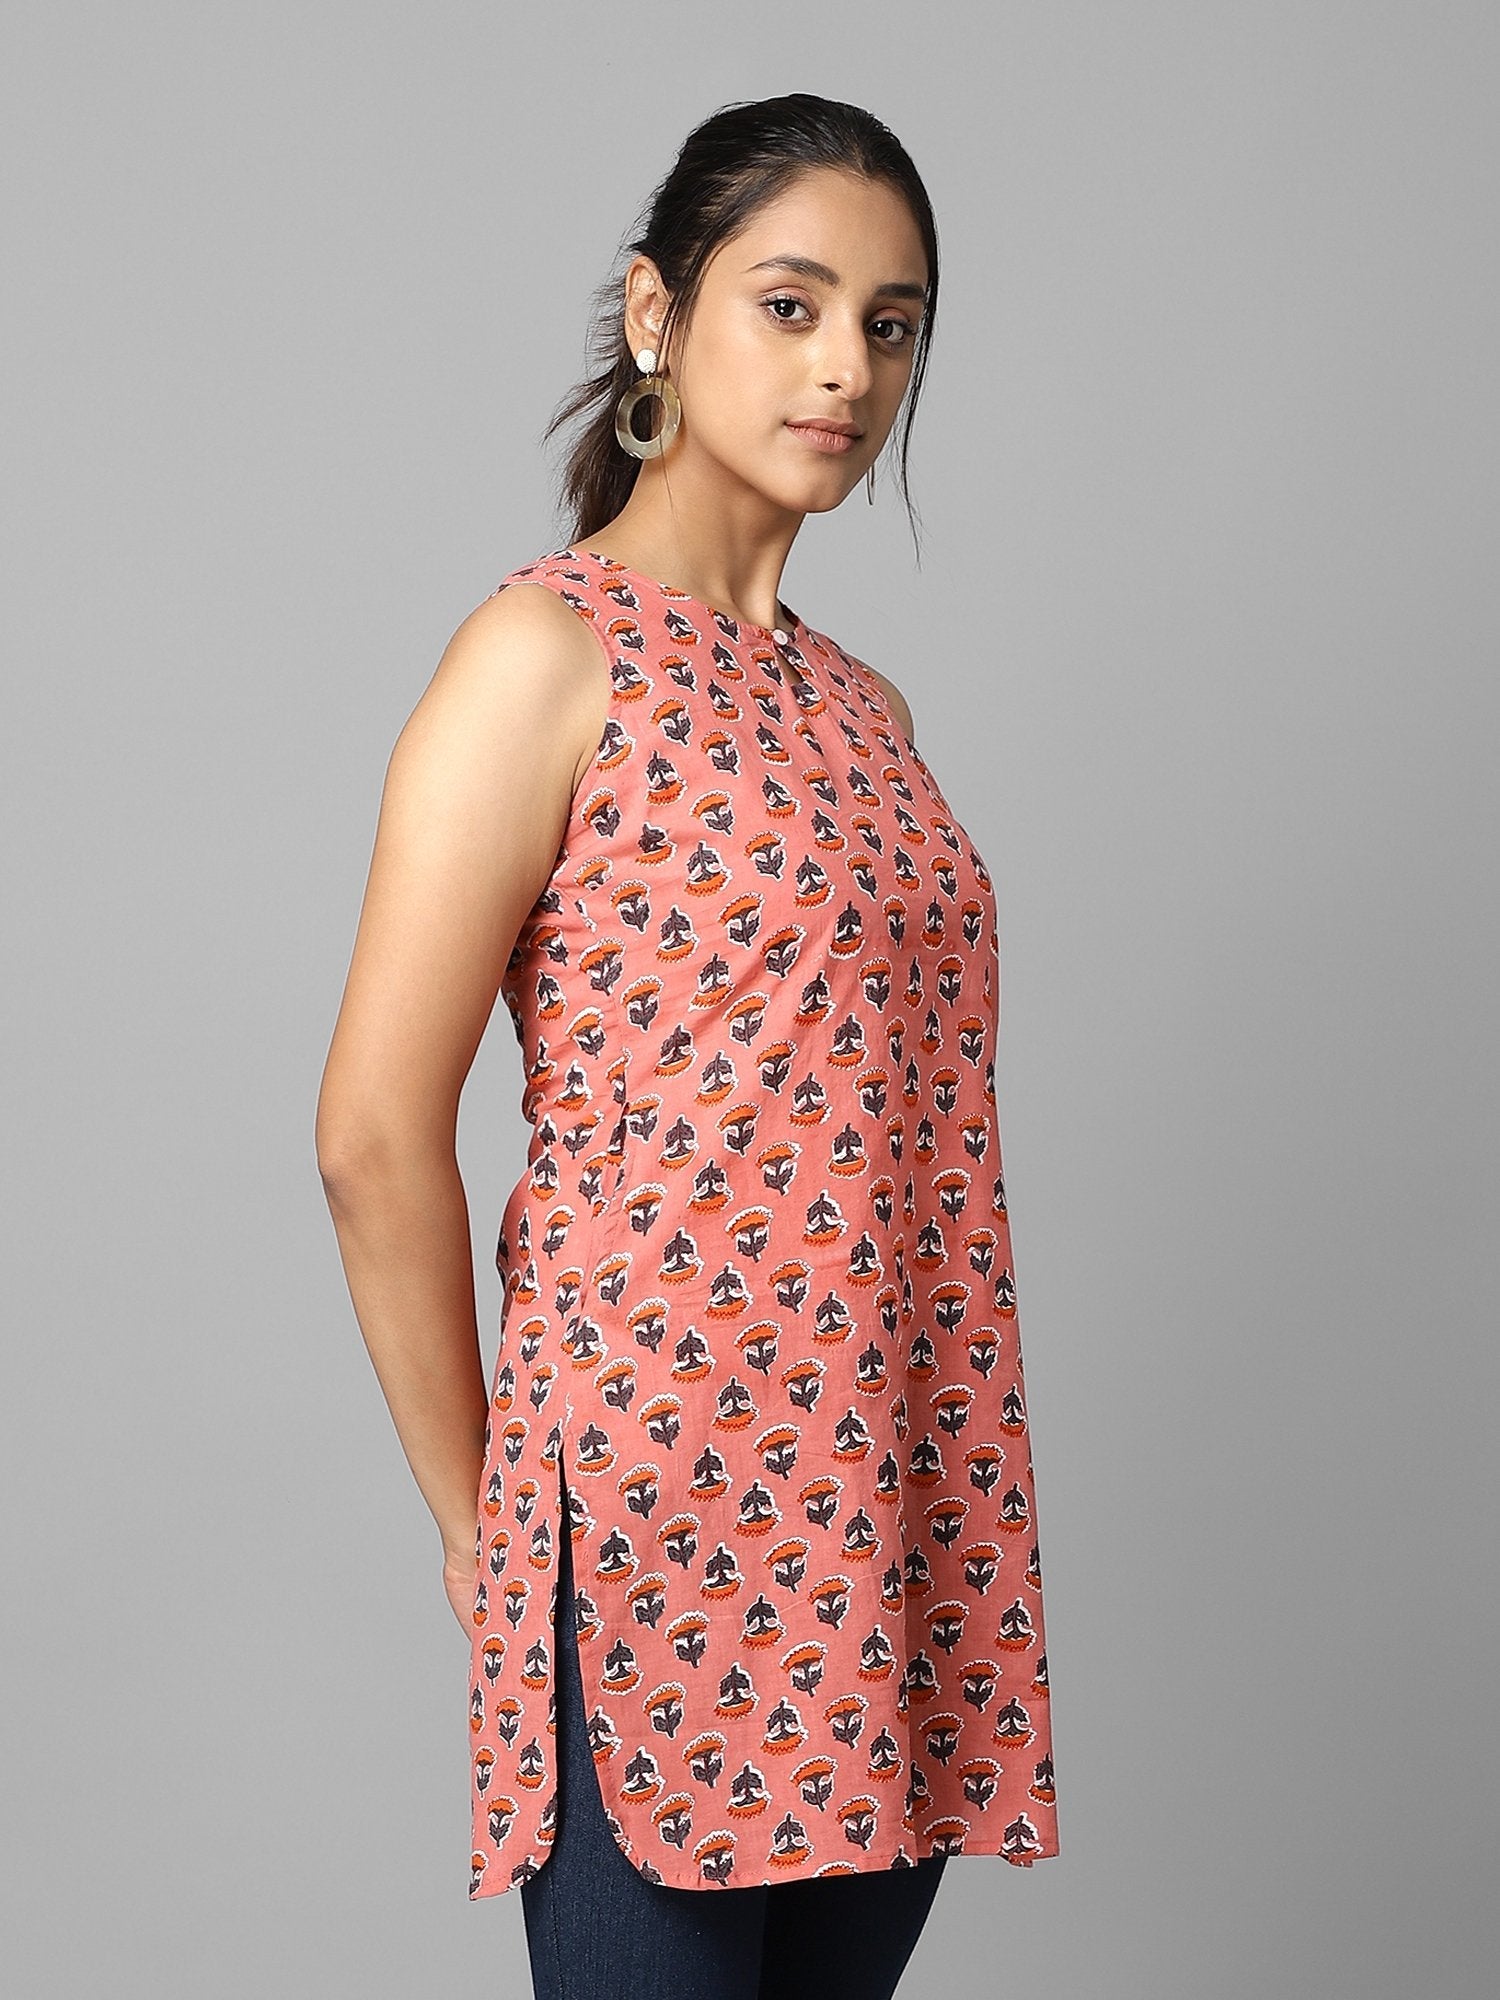 Women's Pink And Orange Floral Printed Tunic - Azira